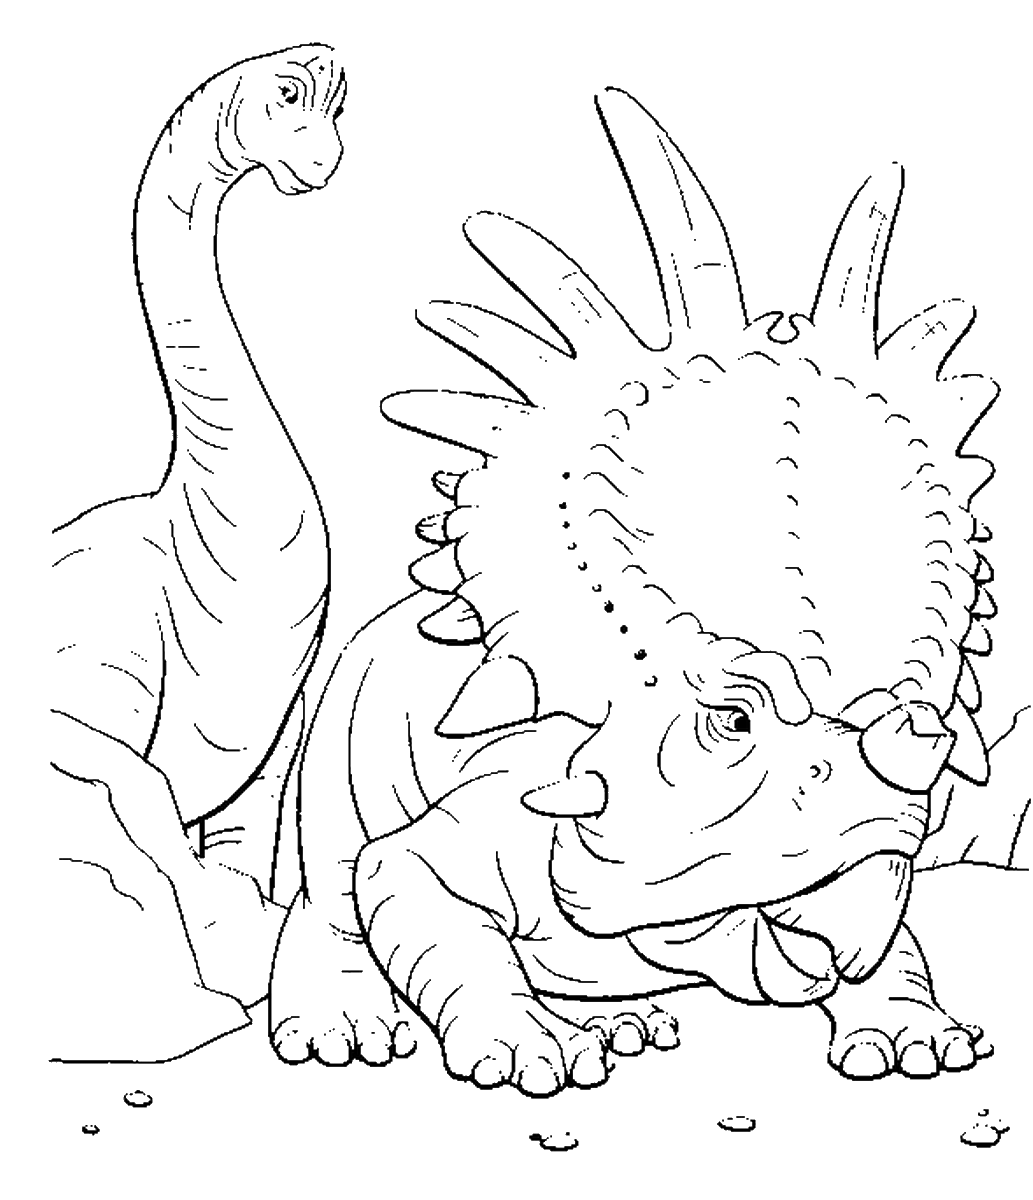 Jurassic Park Coloring Pages Map | Dinosaur World - Coloring Home